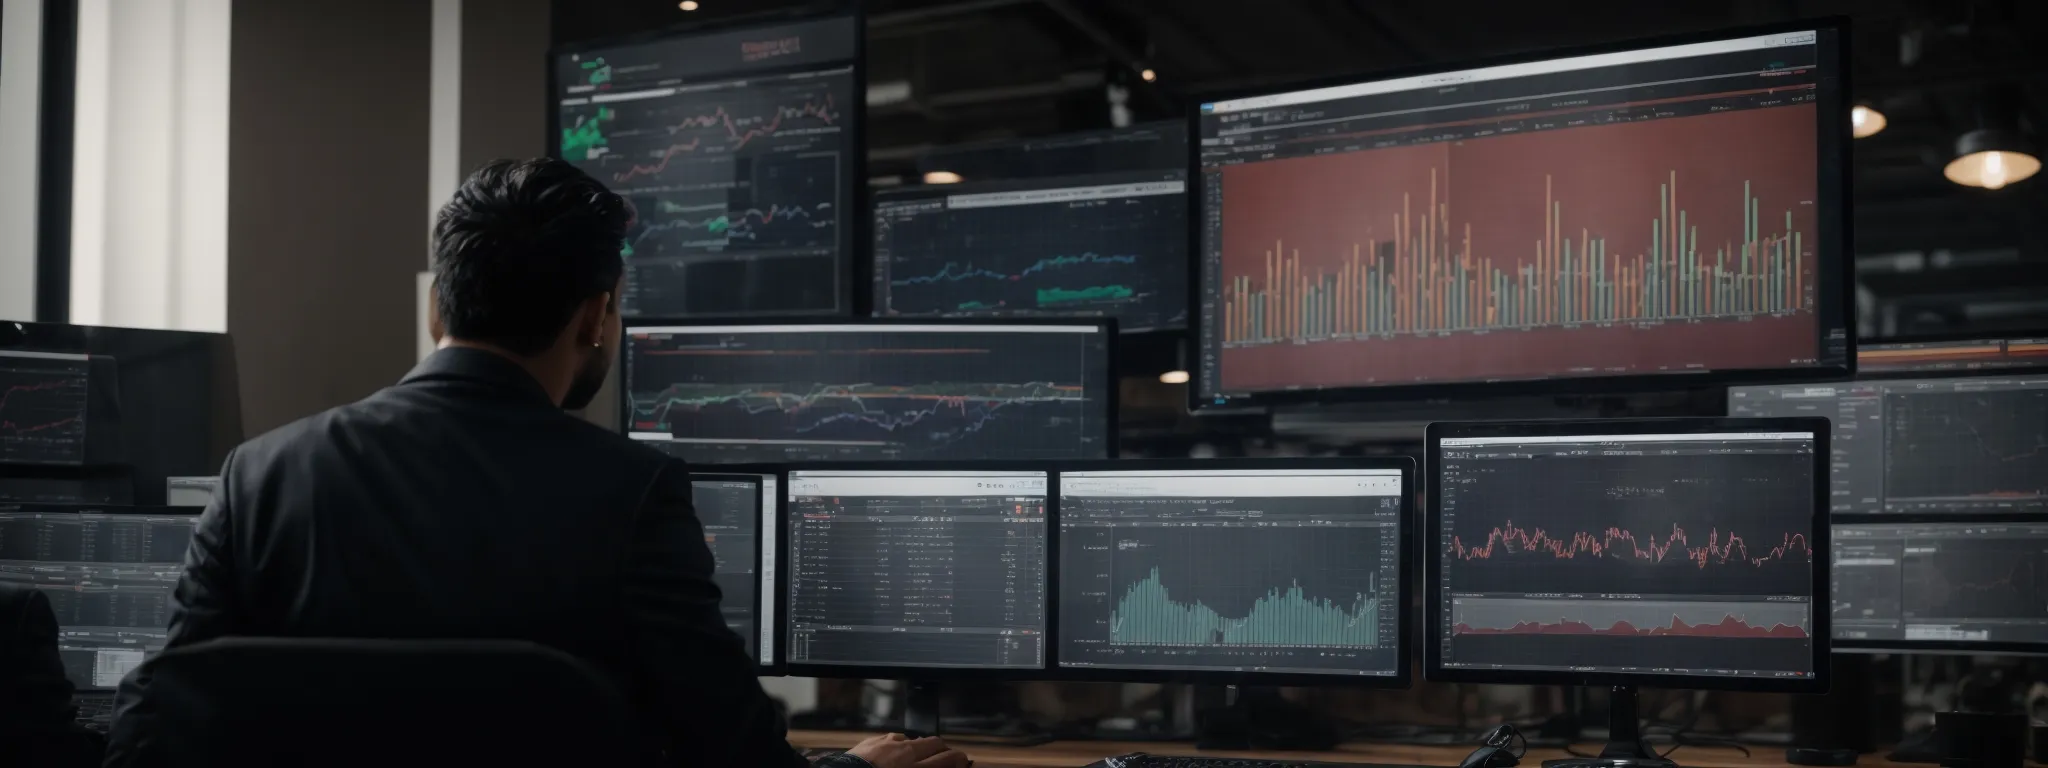 a strategist reviews multiple computer screens displaying trending graphs and data analytics dashboards.